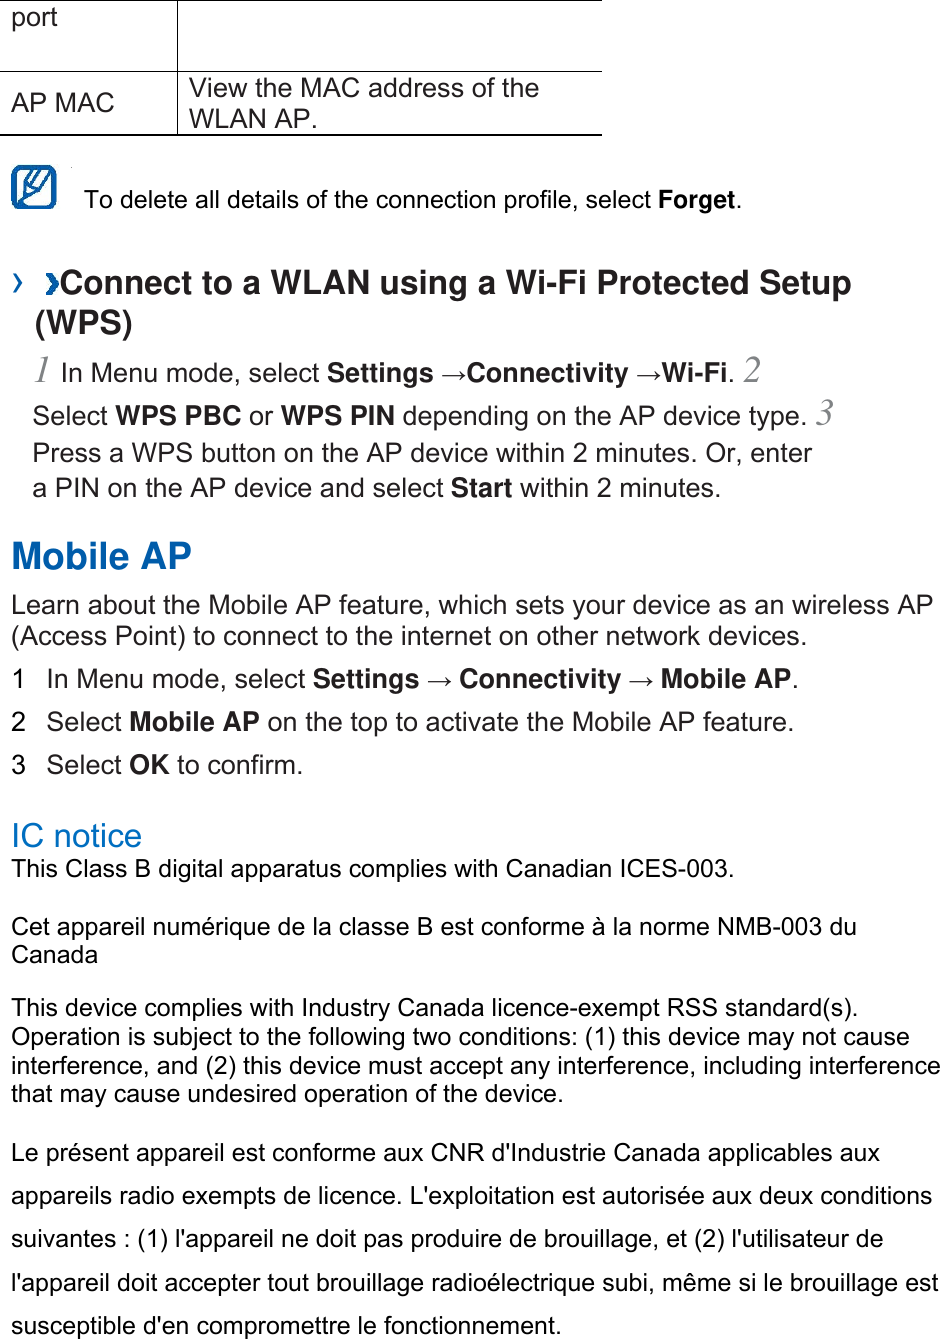 port  AP MAC    View the MAC address of the WLAN AP.      To delete all details of the connection profile, select Forget.  ›  Connect to a WLAN using a Wi-Fi Protected Setup (WPS)   1 In Menu mode, select Settings →Connectivity →Wi-Fi. 2 Select WPS PBC or WPS PIN depending on the AP device type. 3 Press a WPS button on the AP device within 2 minutes. Or, enter a PIN on the AP device and select Start within 2 minutes.   Mobile AP   Learn about the Mobile AP feature, which sets your device as an wireless AP (Access Point) to connect to the internet on other network devices.   1  In Menu mode, select Settings → Connectivity → Mobile AP.  2  Select Mobile AP on the top to activate the Mobile AP feature.   3  Select OK to confirm.    IC notice   This Class B digital apparatus complies with Canadian ICES-003.   Cet appareil numérique de la classe B est conforme à la norme NMB-003 du Canada  This device complies with Industry Canada licence-exempt RSS standard(s). Operation is subject to the following two conditions: (1) this device may not cause interference, and (2) this device must accept any interference, including interference that may cause undesired operation of the device.   Le présent appareil est conforme aux CNR d&apos;Industrie Canada applicables aux appareils radio exempts de licence. L&apos;exploitation est autorisée aux deux conditions suivantes : (1) l&apos;appareil ne doit pas produire de brouillage, et (2) l&apos;utilisateur de l&apos;appareil doit accepter tout brouillage radioélectrique subi, même si le brouillage est susceptible d&apos;en compromettre le fonctionnement.    